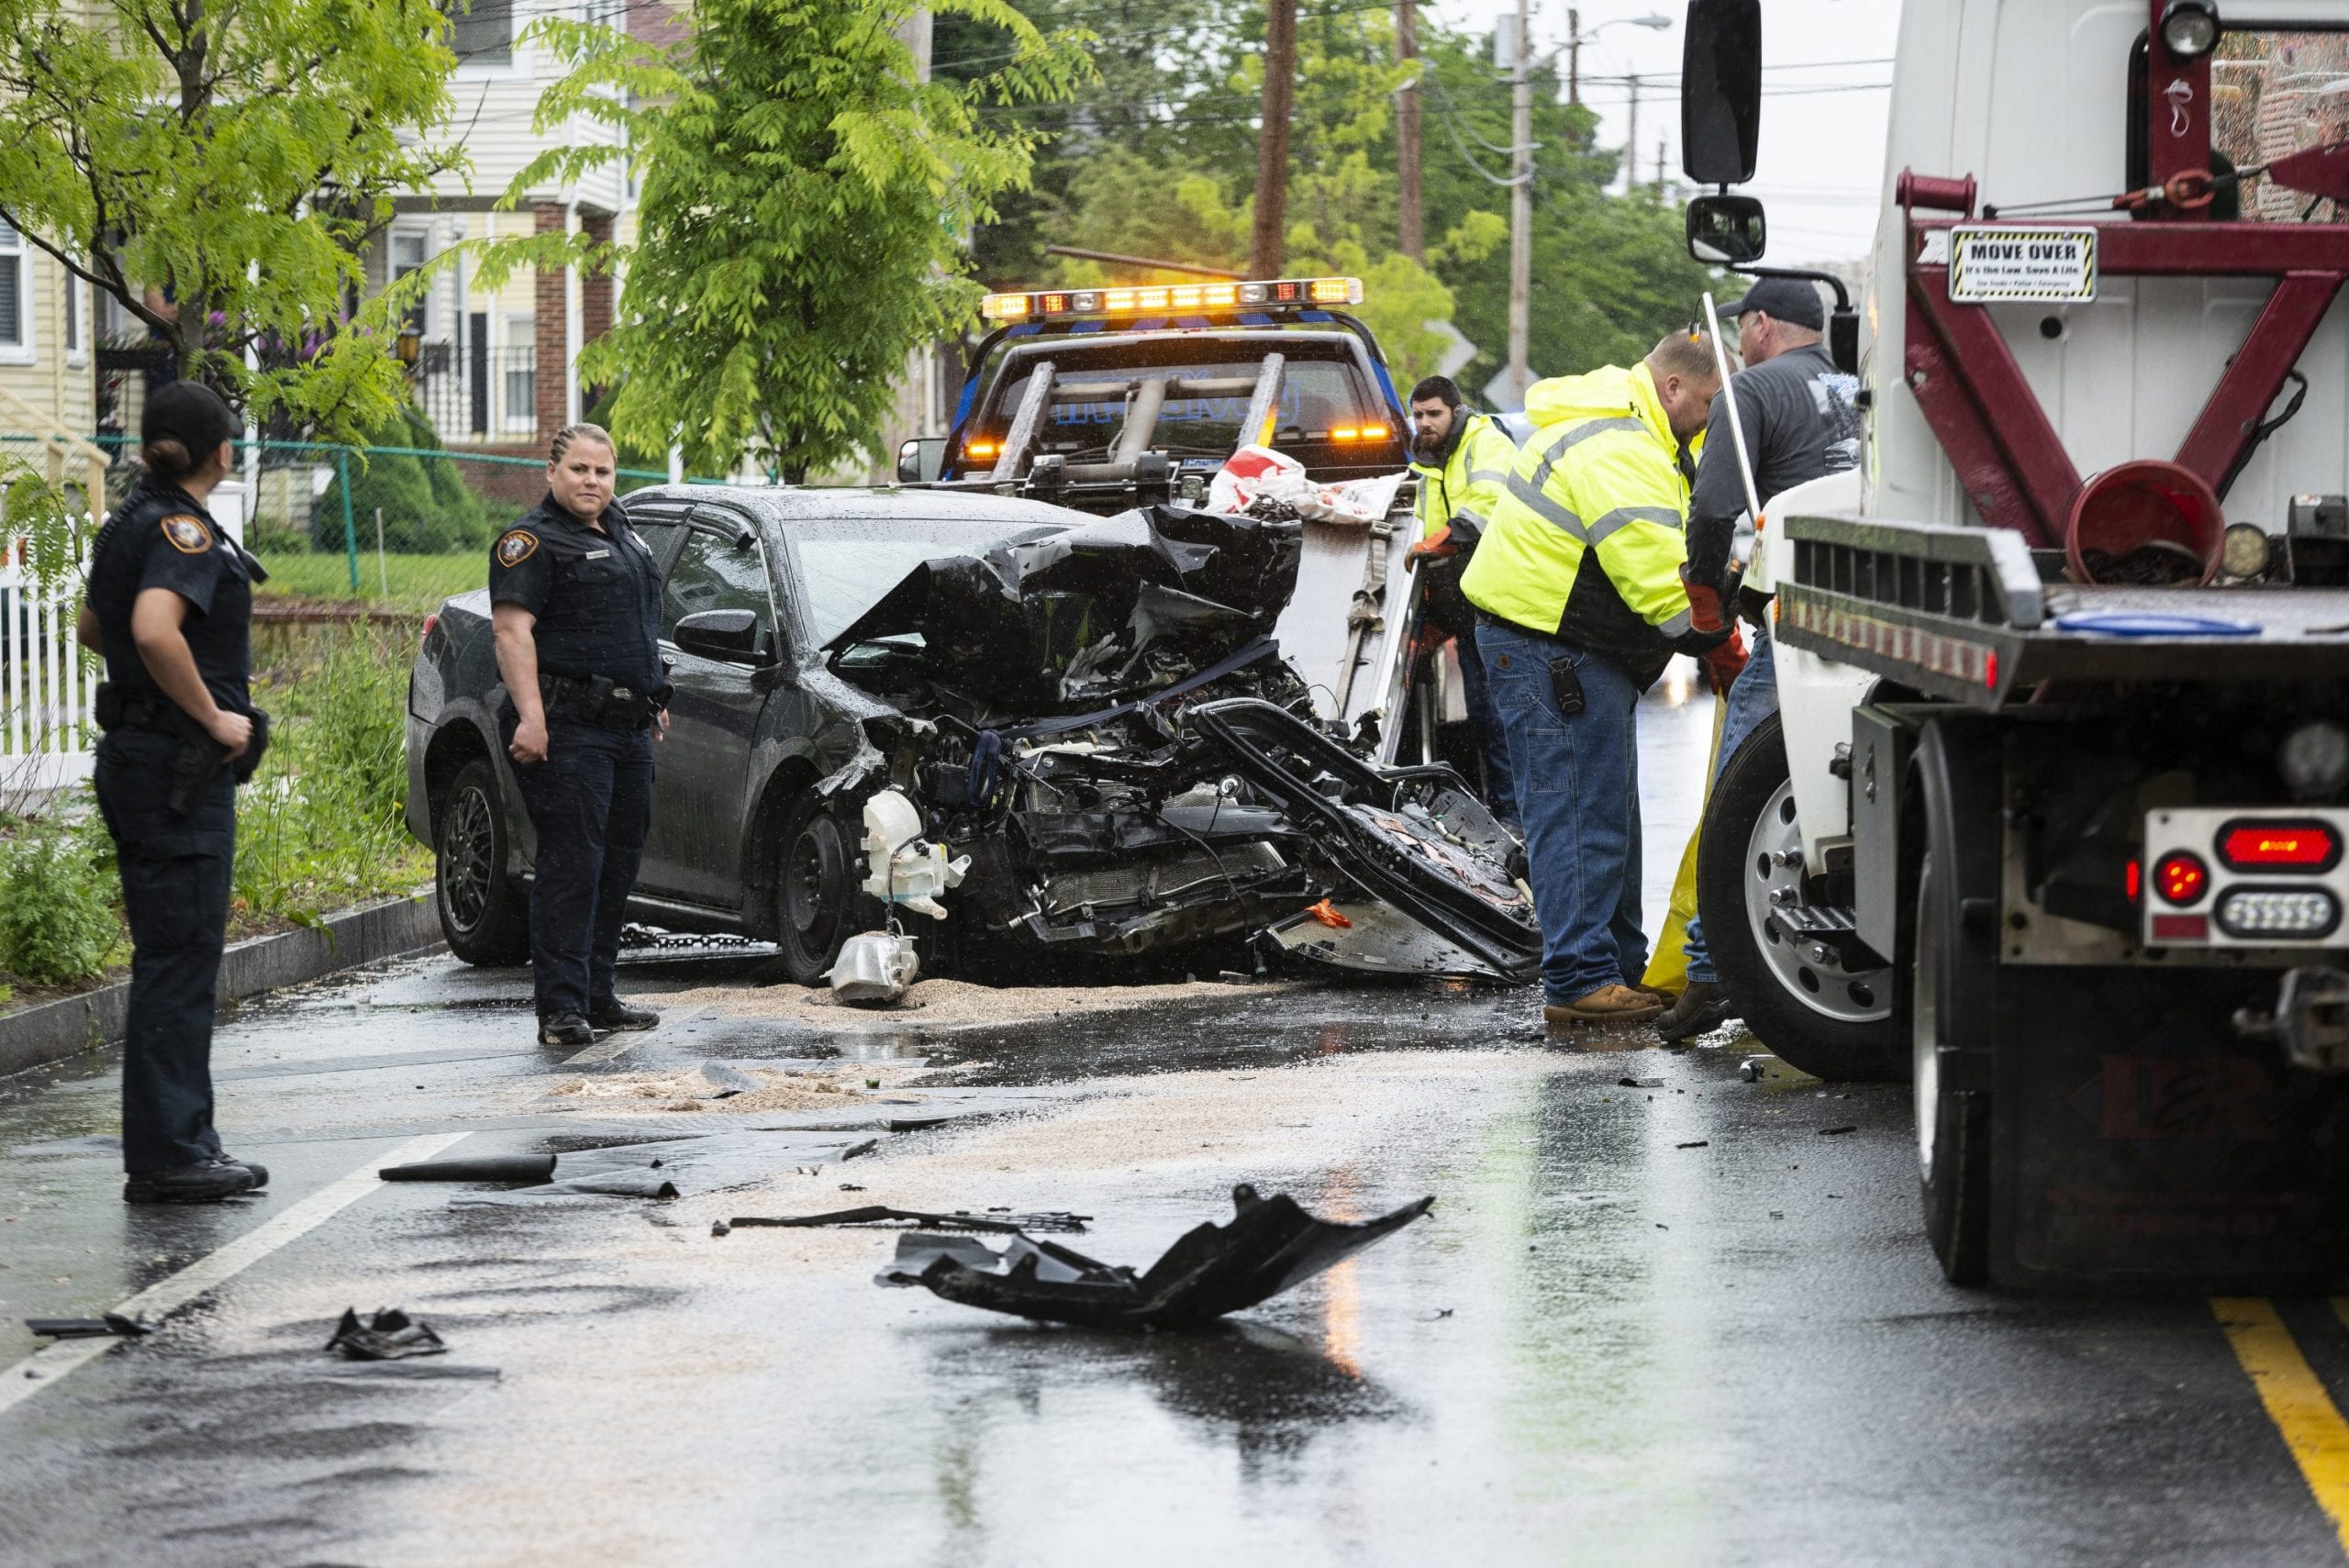 First responders and crews work to clean up a head-on collision between a tow truck and sedan on Lincoln Avenue in Saugus Tuesday afternoon.